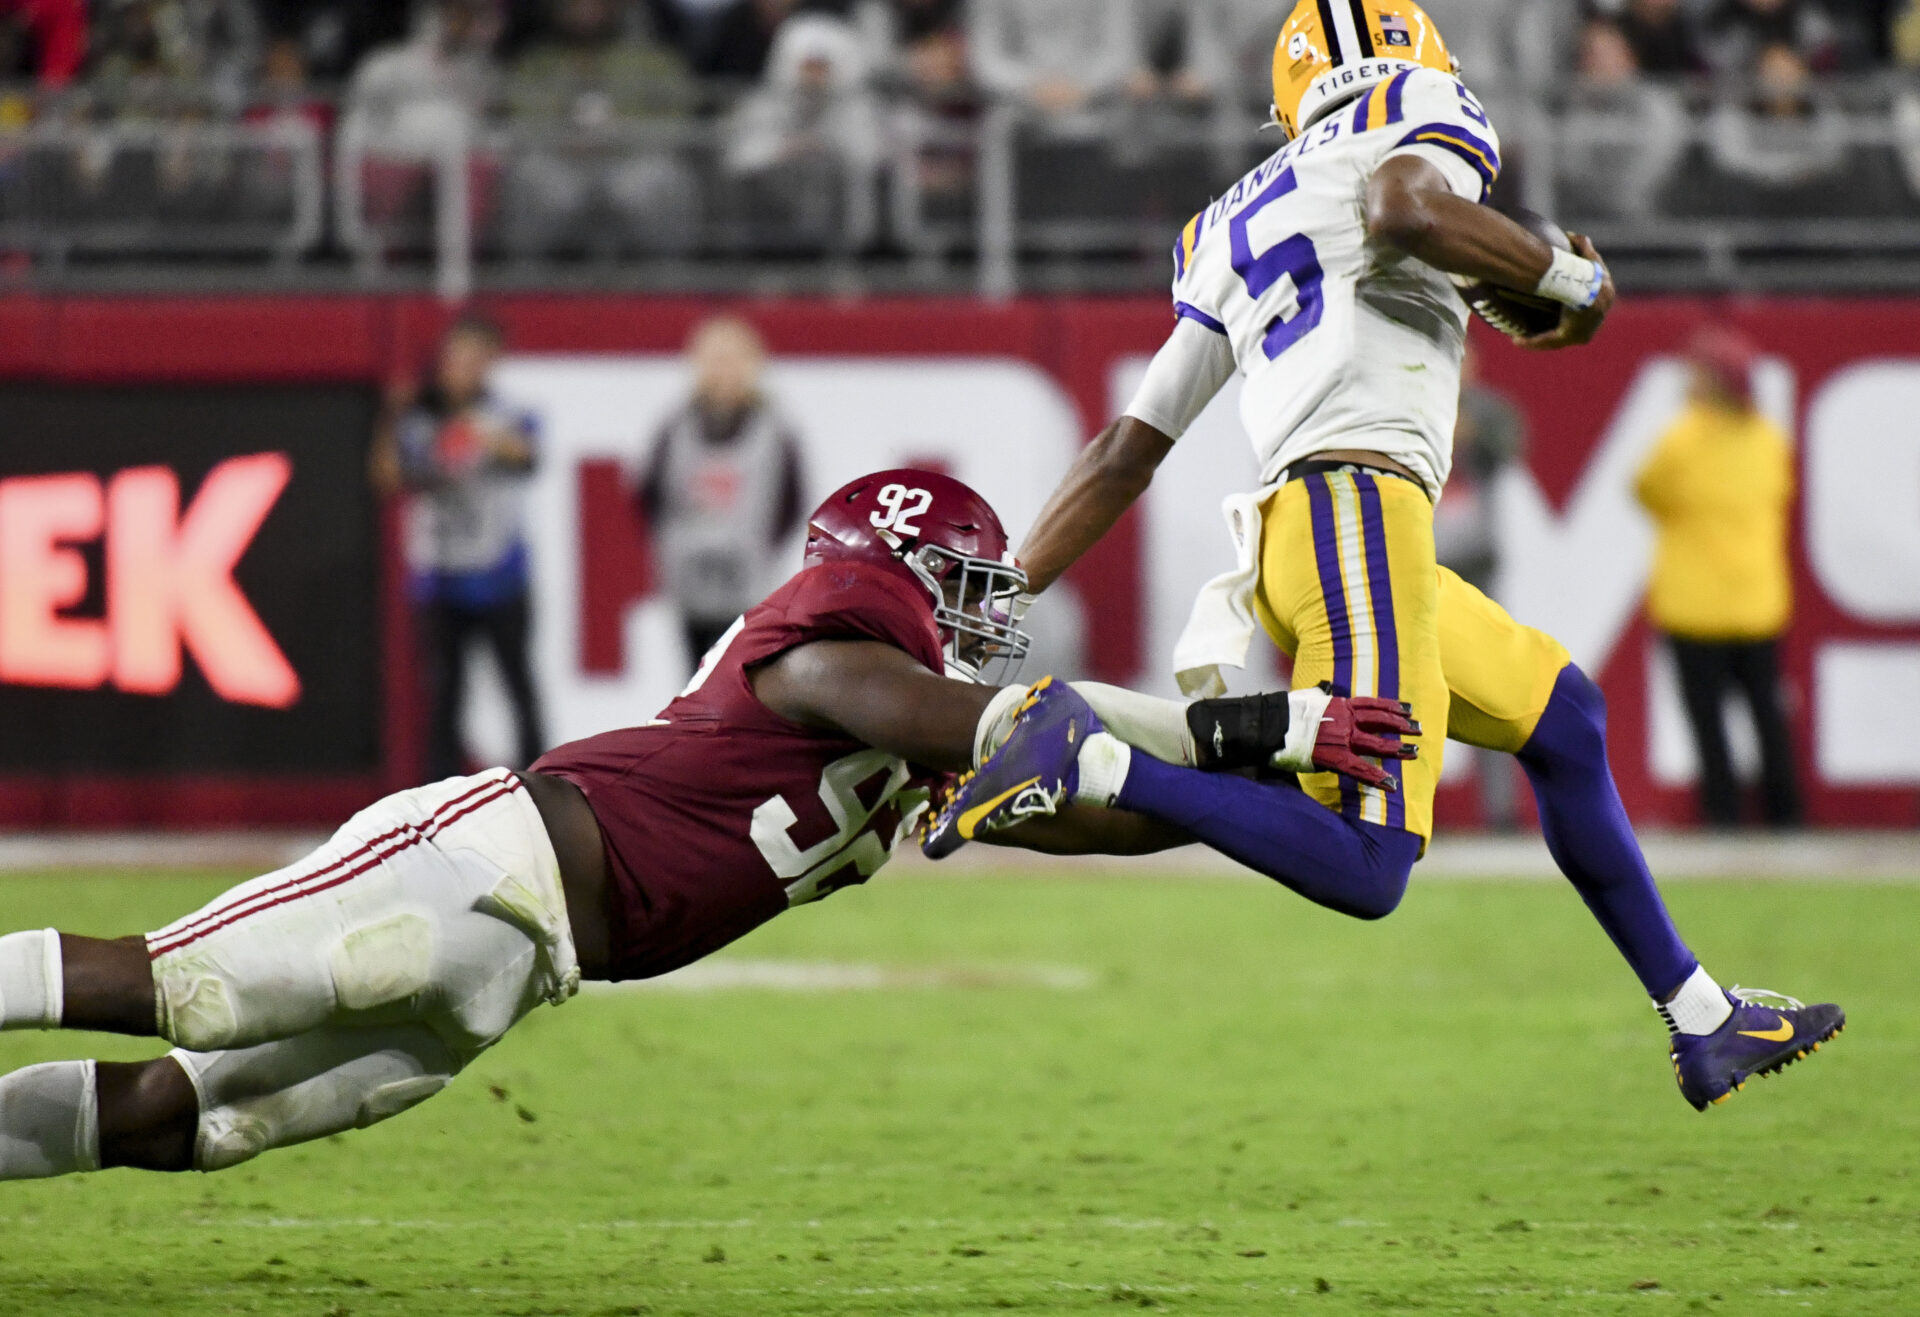 LSU QB Jayden Daniels runs while an Alabama defender reaches out to stop him